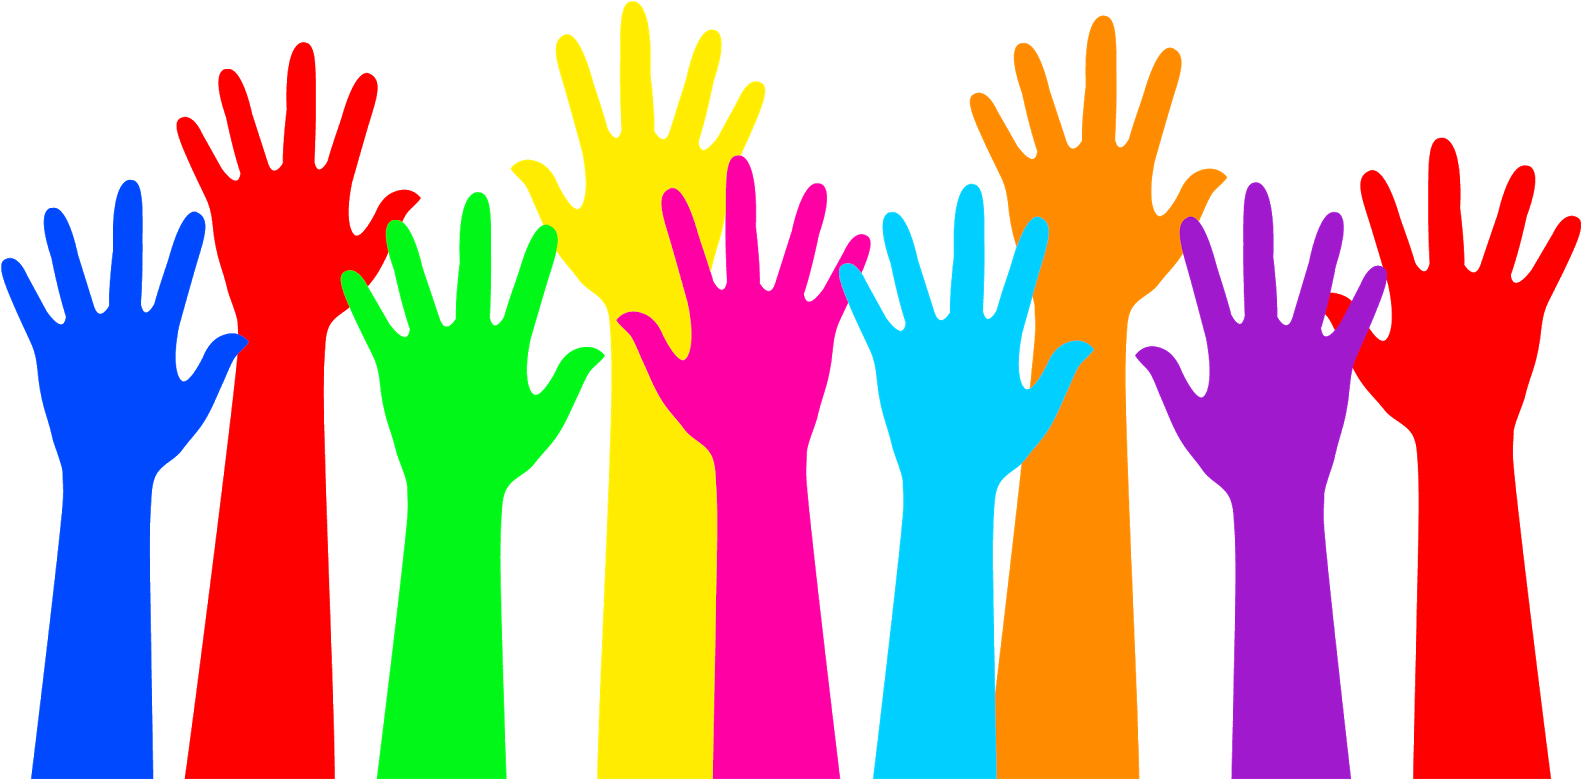 A Group Of Colorful Hands